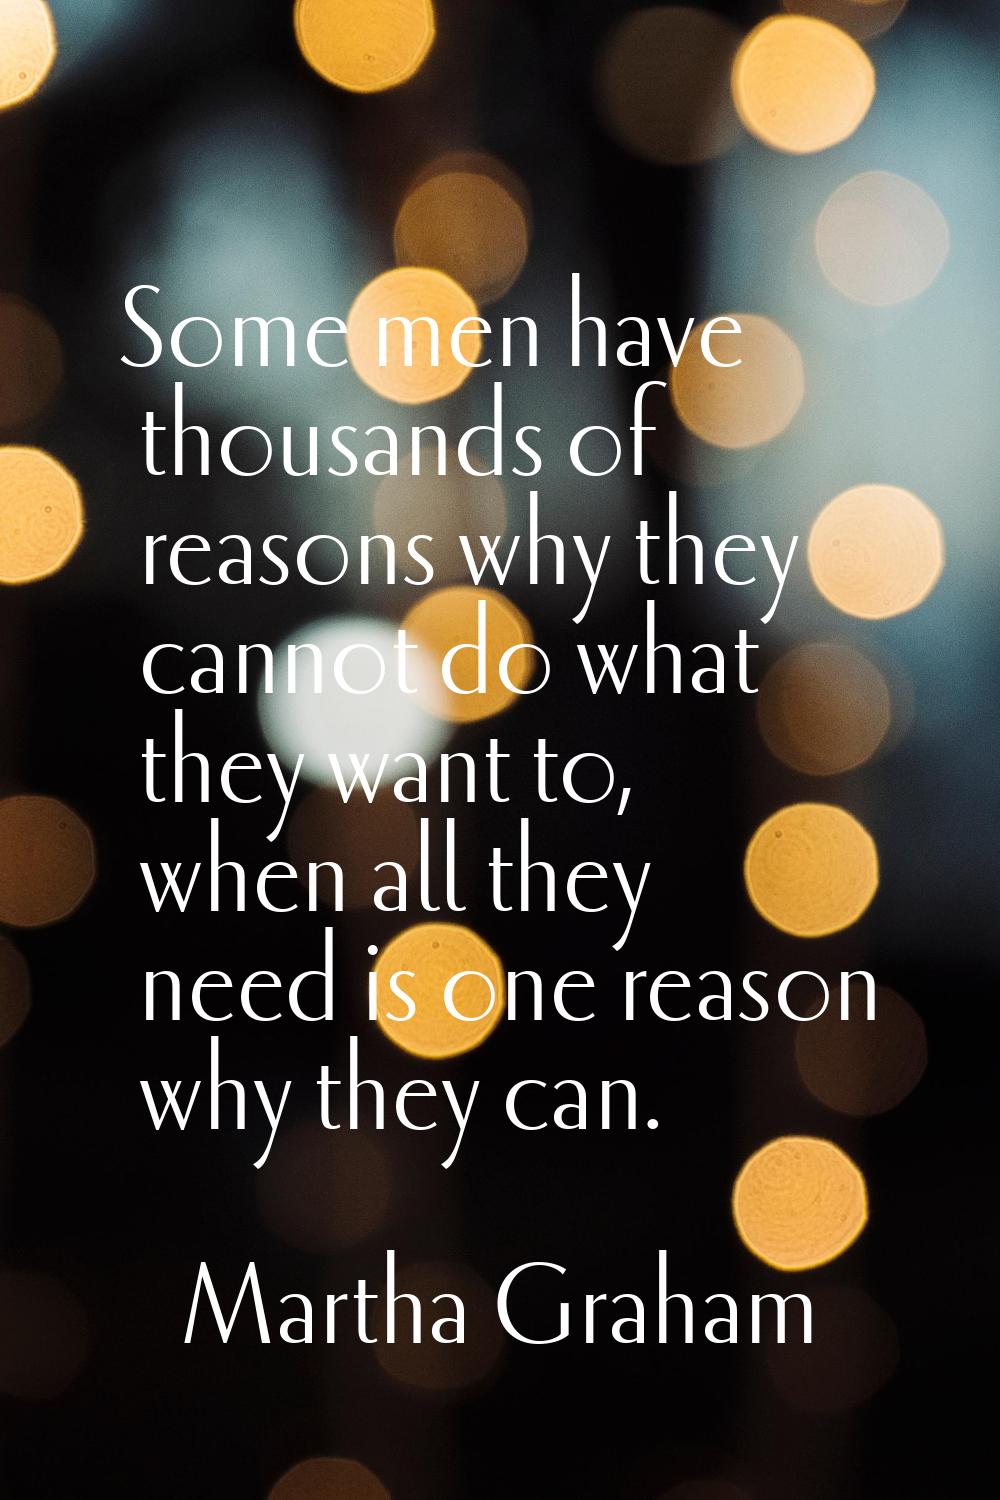 Some men have thousands of reasons why they cannot do what they want to, when all they need is one 